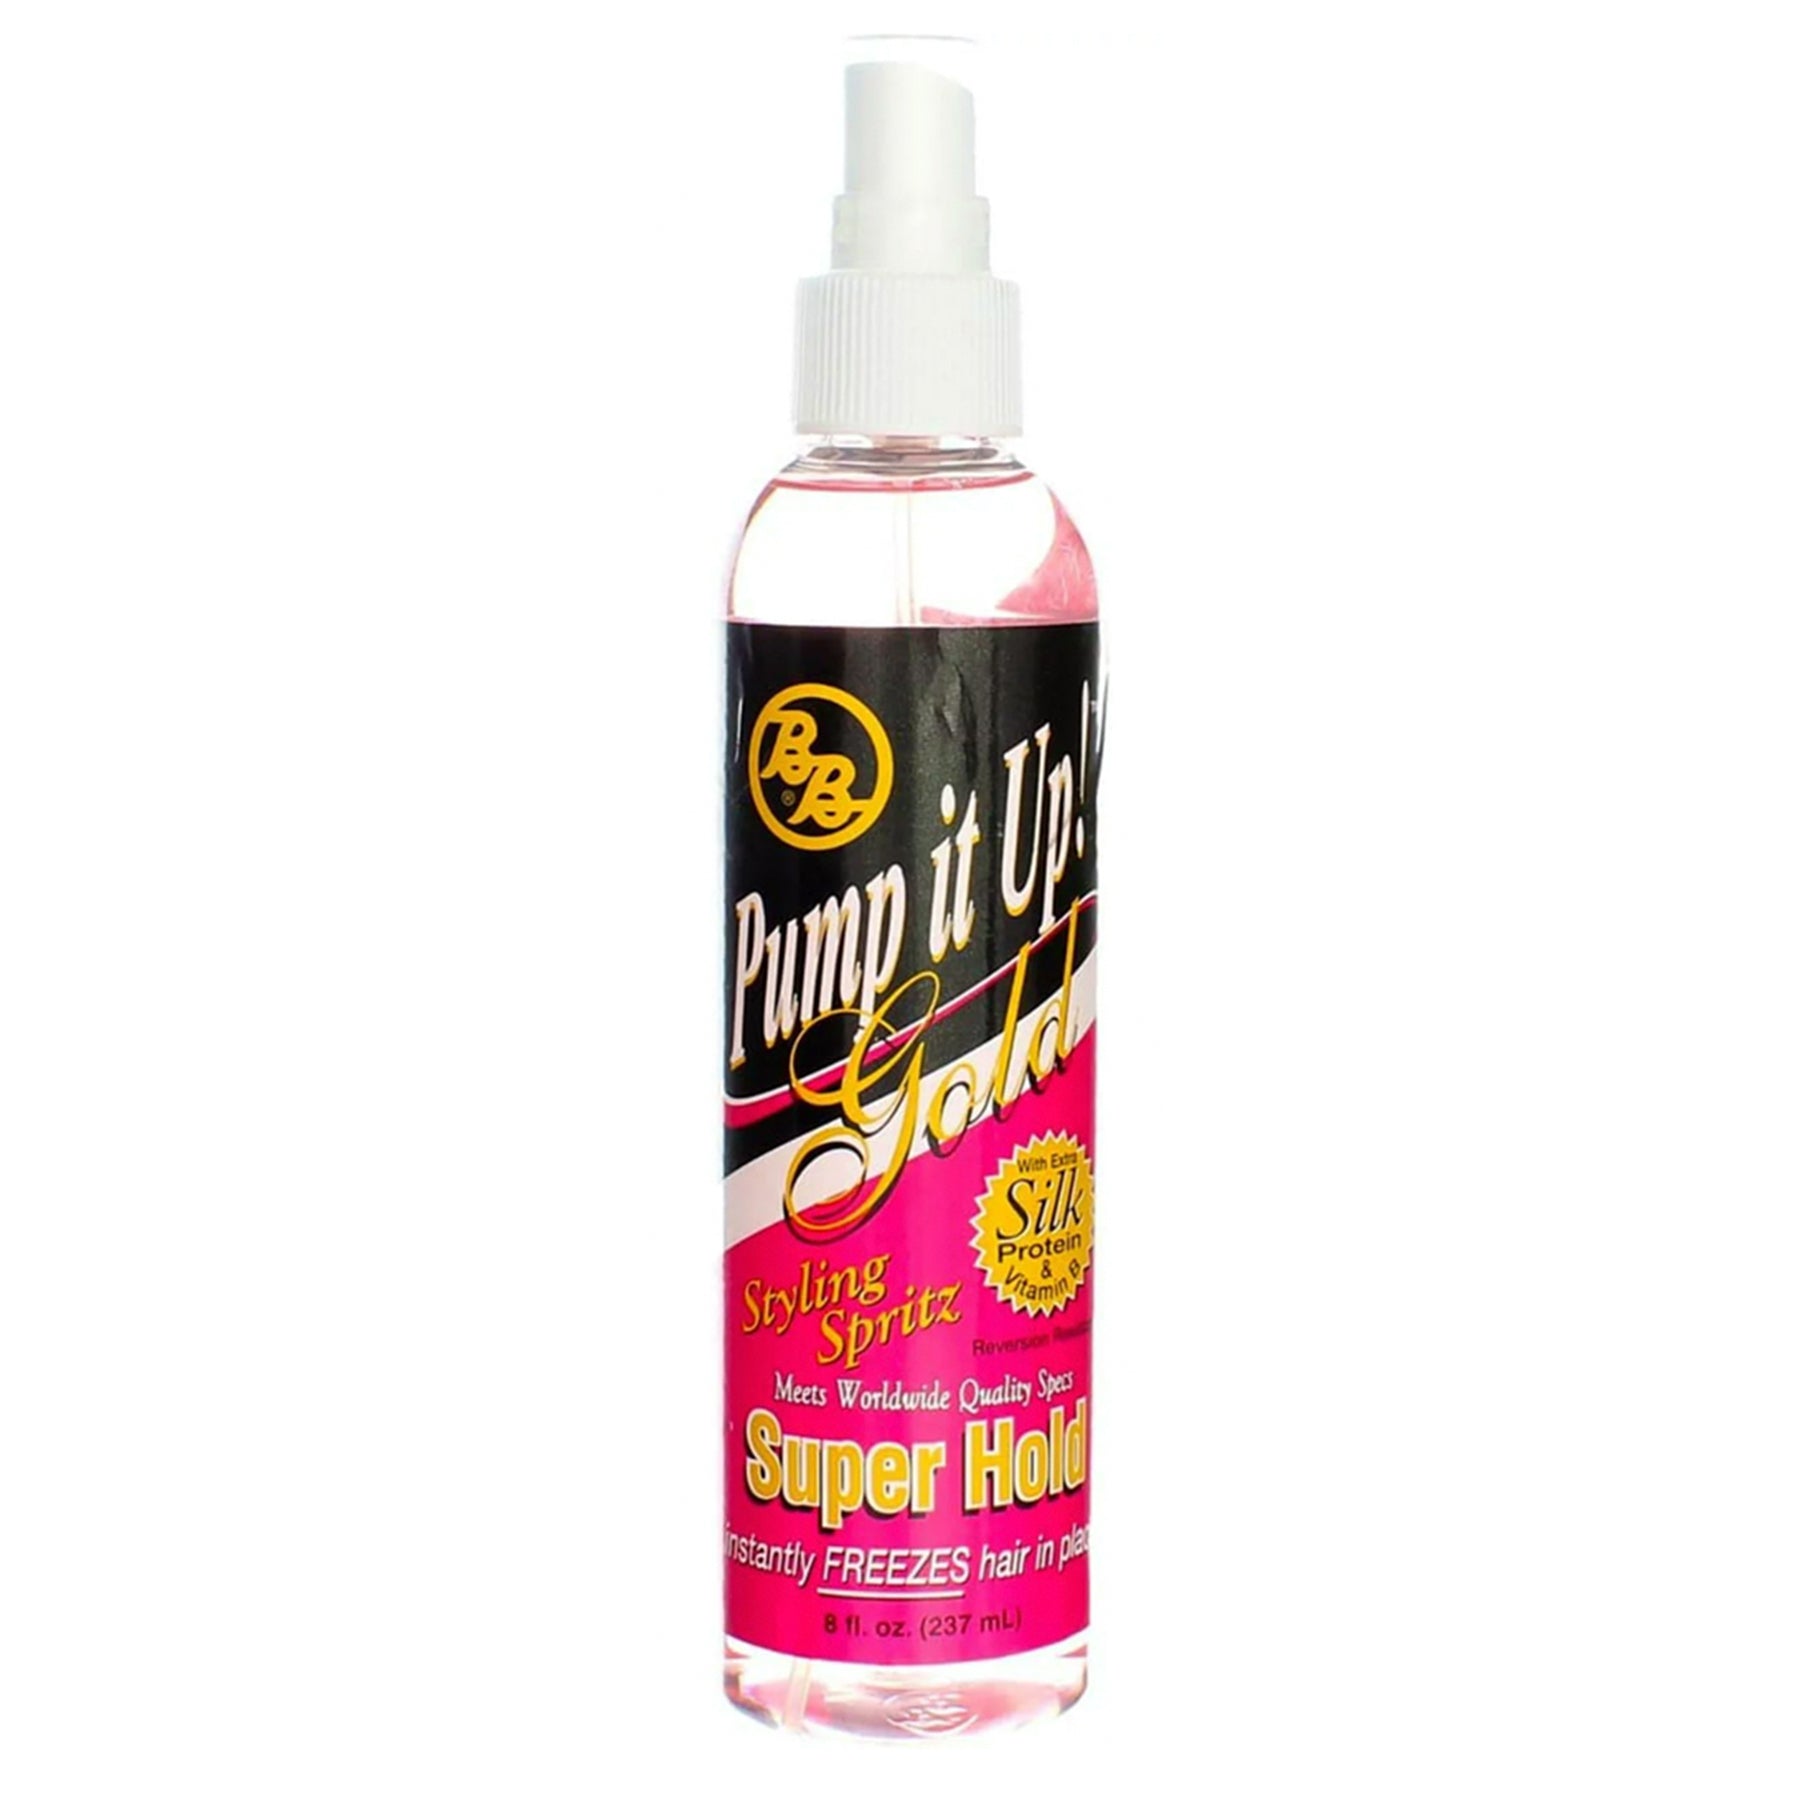 Bronner Brothers Pump It Up Spritz Gold, Super Hold